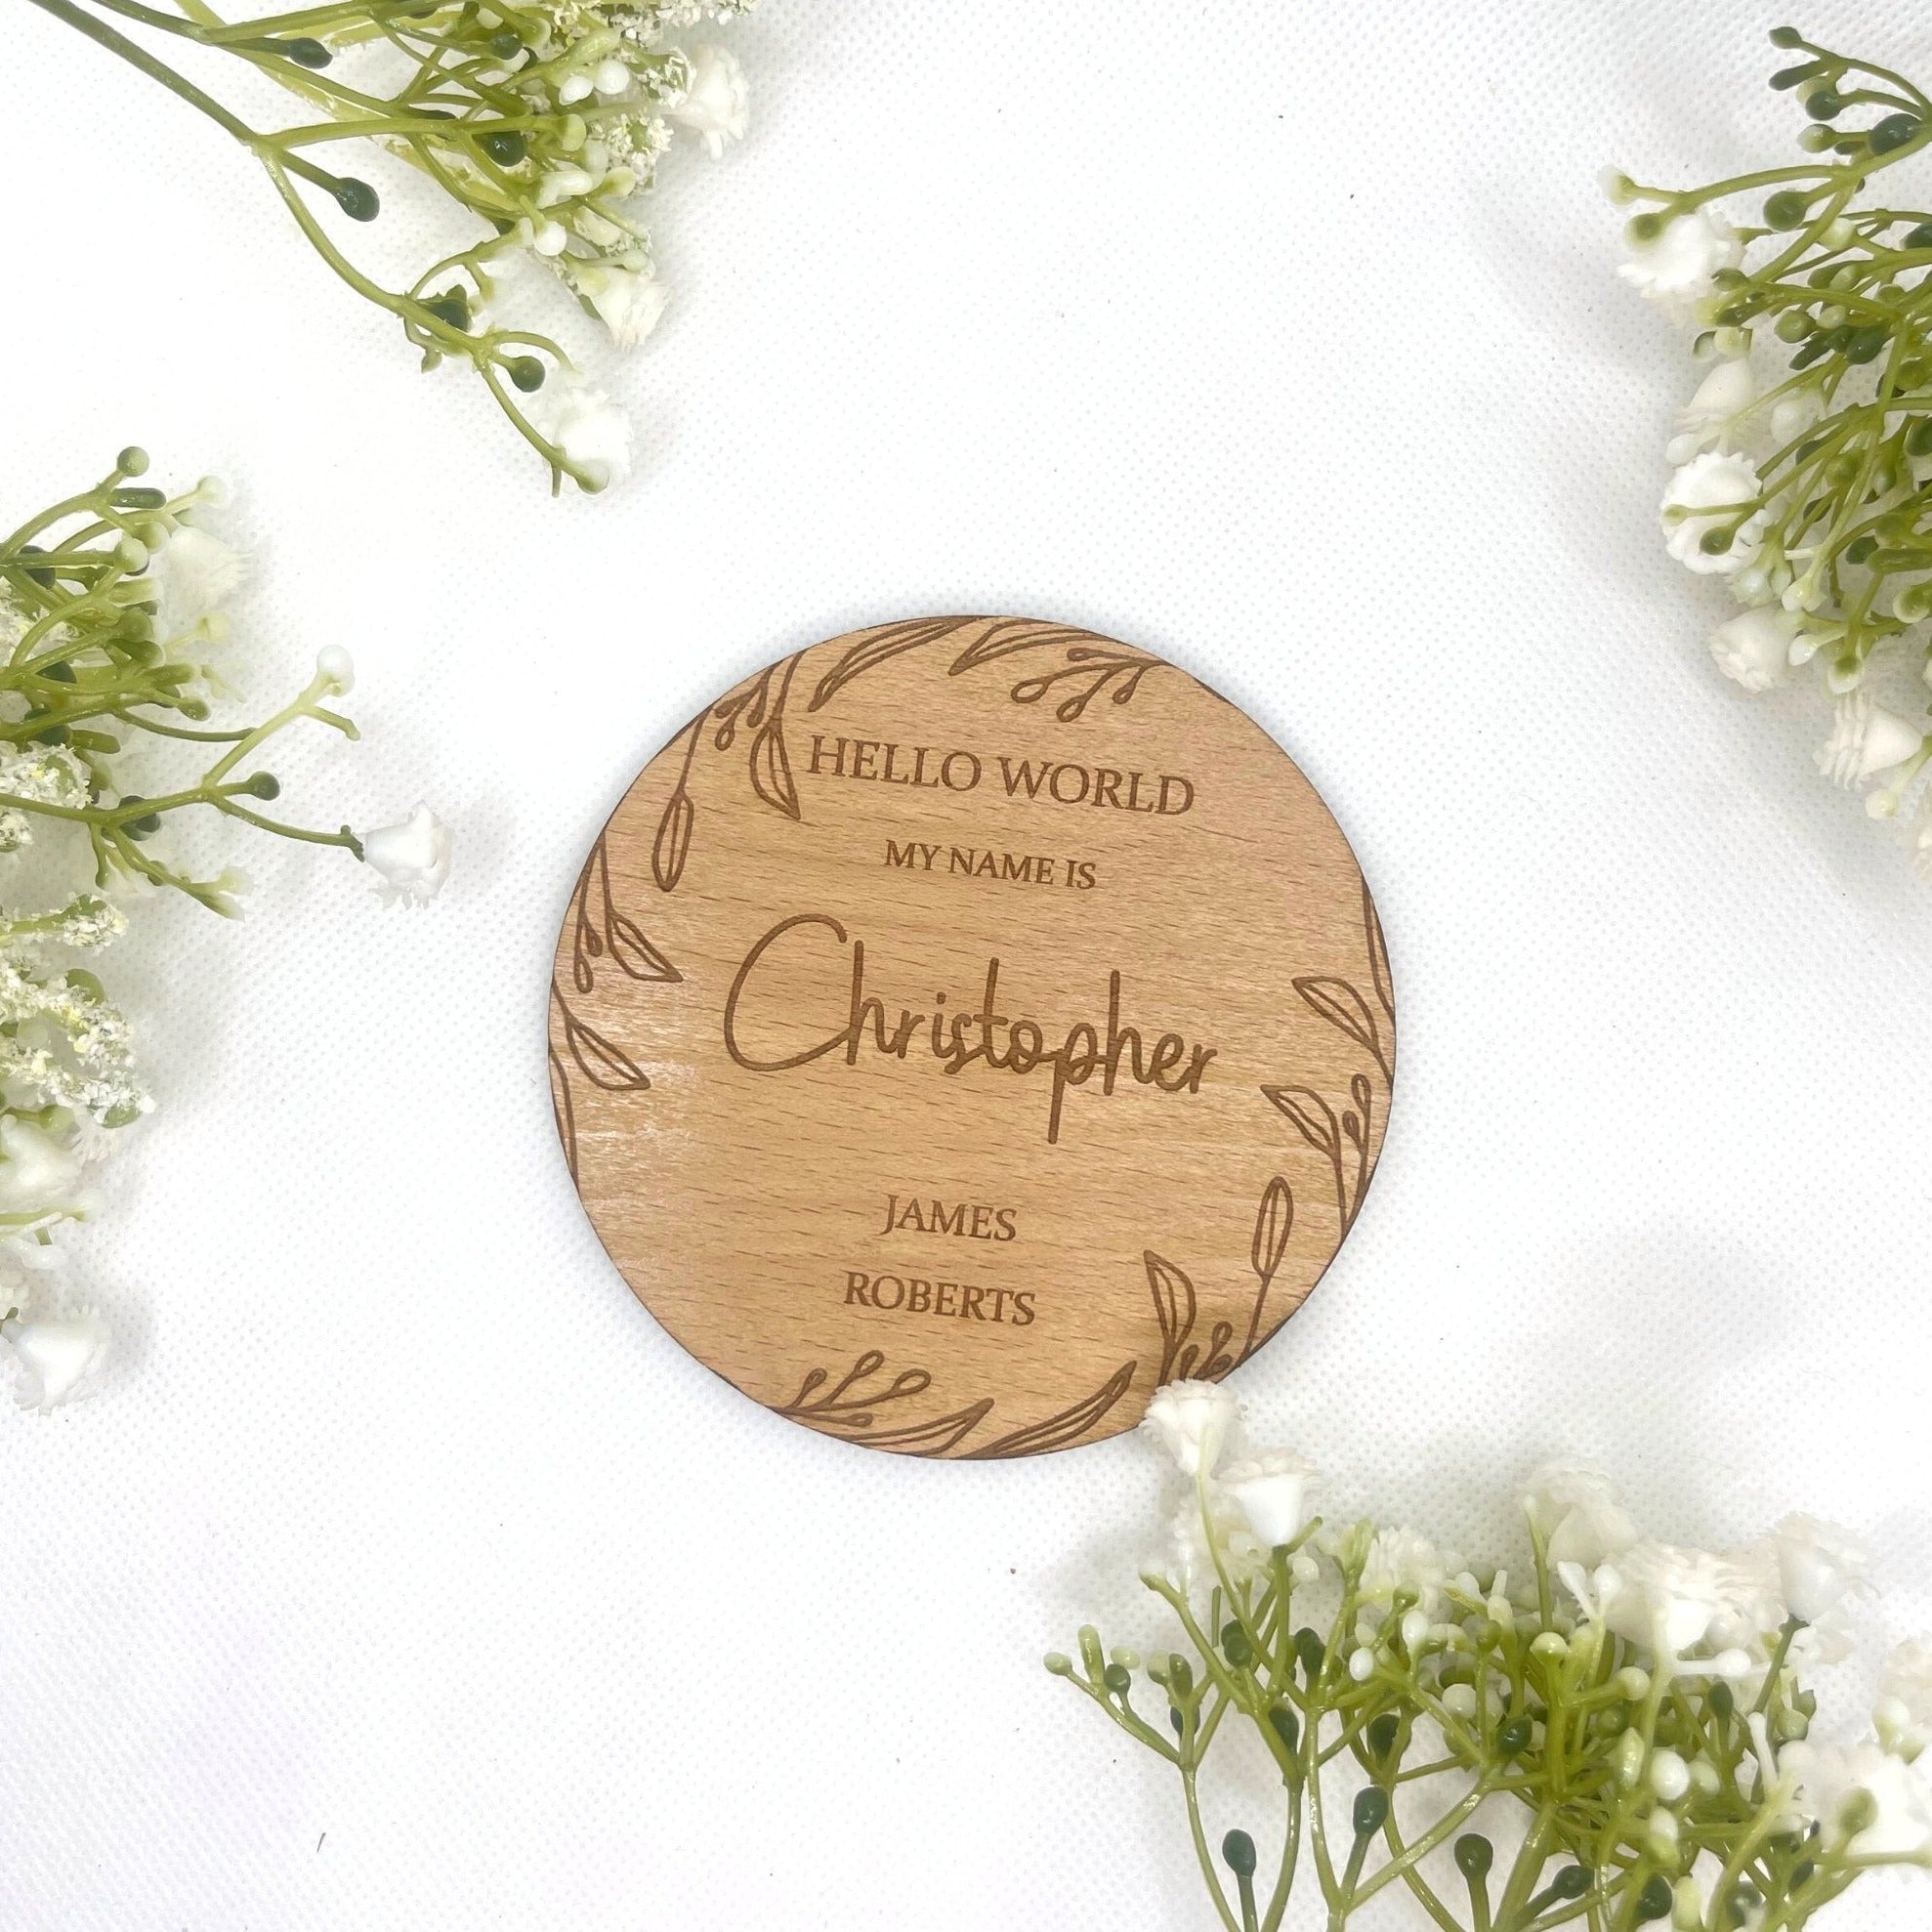 Experience joy every day with our Personalized Plaque adorned with a charming leaf design, adding elegance to your baby's nursery.